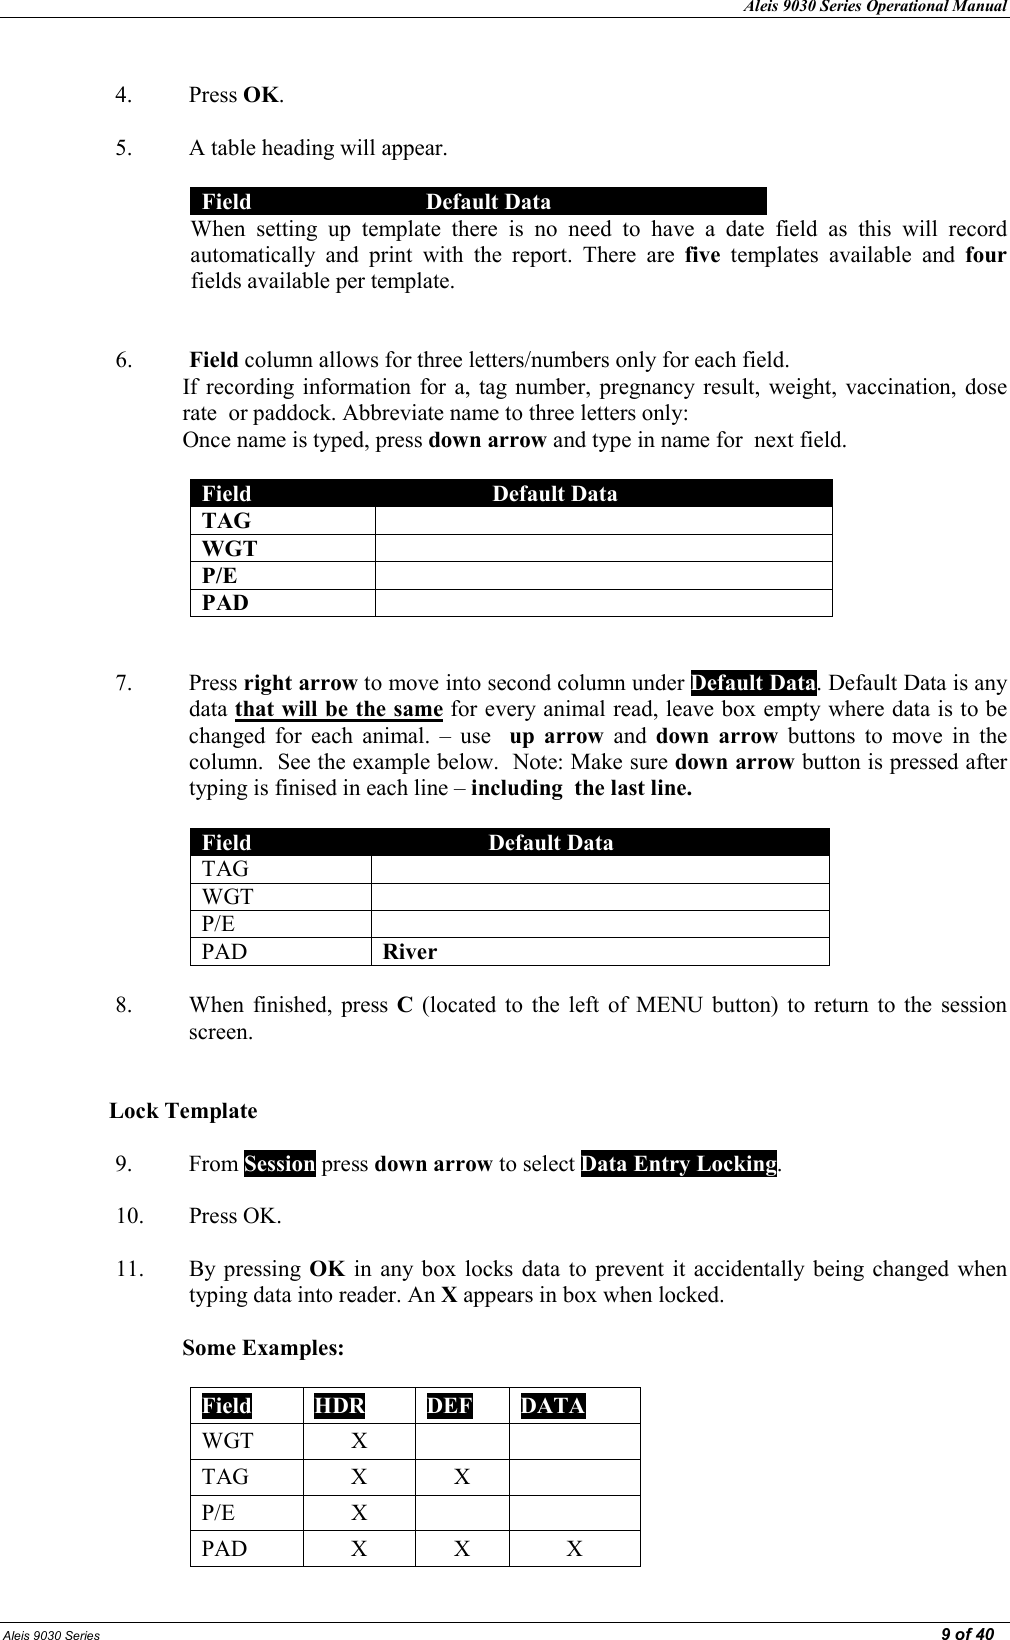 Aleis 9030 Series Operational Manual  Aleis 9030 Series                                                                                                                                                                                                                                                  9 of 40  4. Press OK.  5. A table heading will appear.   Field  Default Data When  setting  up  template  there  is  no  need  to  have  a  date  field  as  this  will  record automatically  and  print  with  the  report.  There  are  five  templates  available  and  four fields available per template.   6. Field column allows for three letters/numbers only for each field.   If recording  information  for  a,  tag number, pregnancy result,  weight,  vaccination, dose rate  or paddock. Abbreviate name to three letters only:  Once name is typed, press down arrow and type in name for  next field.  Field  Default Data TAG   WGT   P/E   PAD     7. Press right arrow to move into second column under Default Data. Default Data is any data that will be the same for every animal read, leave box empty where data is to be changed  for  each  animal.  –  use    up  arrow  and  down  arrow  buttons  to  move  in  the column.  See the example below.  Note: Make sure down arrow button is pressed after typing is finised in each line – including  the last line.  Field  Default Data TAG   WGT   P/E   PAD  River  8. When  finished,  press  C  (located  to  the  left  of  MENU button)  to  return to  the  session screen.   Lock Template  9. From Session press down arrow to select Data Entry Locking.  10. Press OK.  11. By pressing  OK in  any  box locks  data  to prevent it  accidentally being  changed when typing data into reader. An X appears in box when locked.   Some Examples:  Field  HDR  DEF  DATA WGT  X   TAG  X  X   P/E  X   PAD  X  X  X 